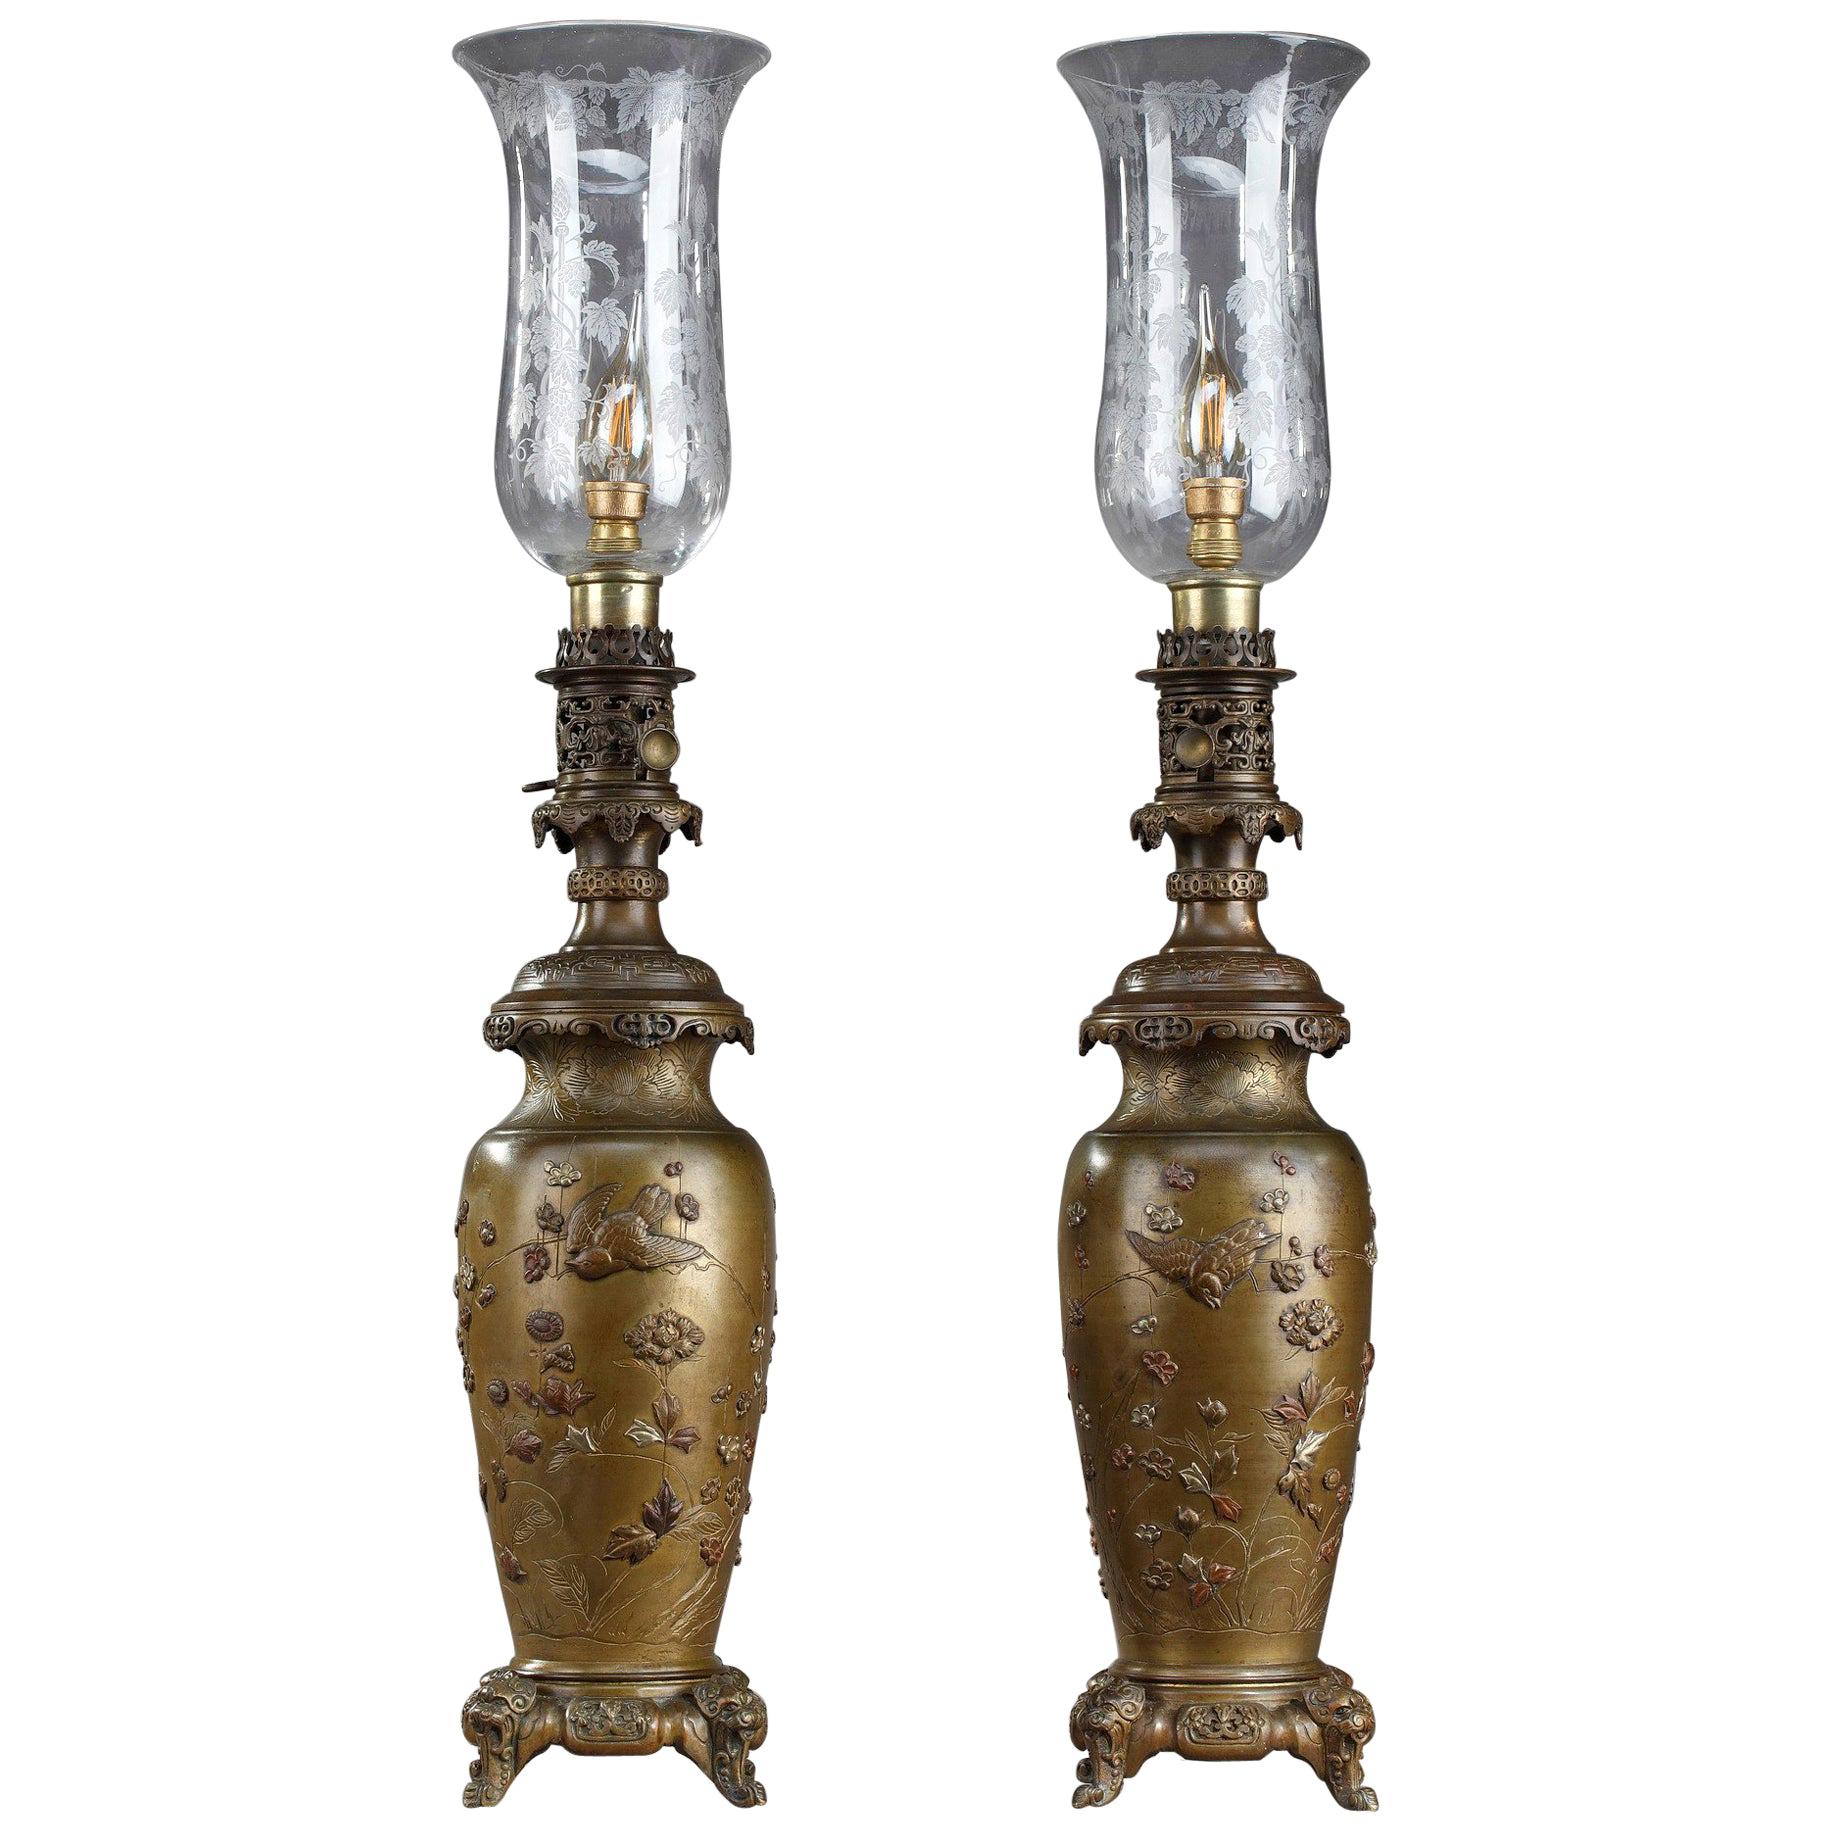 Pair of Kerosene Lamps with Birds in Chinese Style